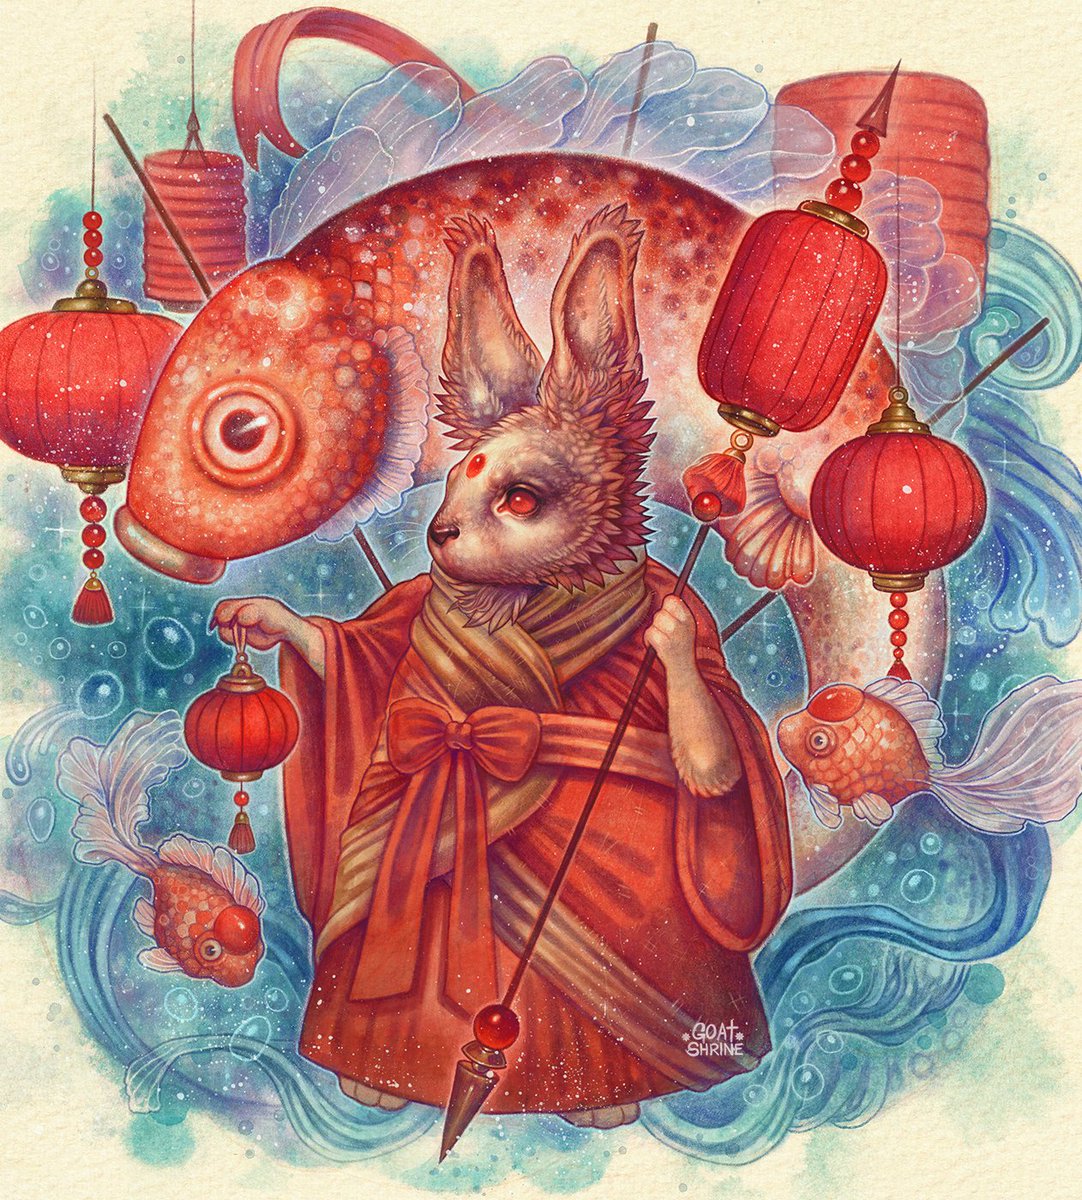 「Happy year of the Water Rabbit This excl」|𝔊𝔬𝔞𝔱𝔰𝔥𝔯𝔦𝔫𝔢 ☿ Looking for work!のイラスト